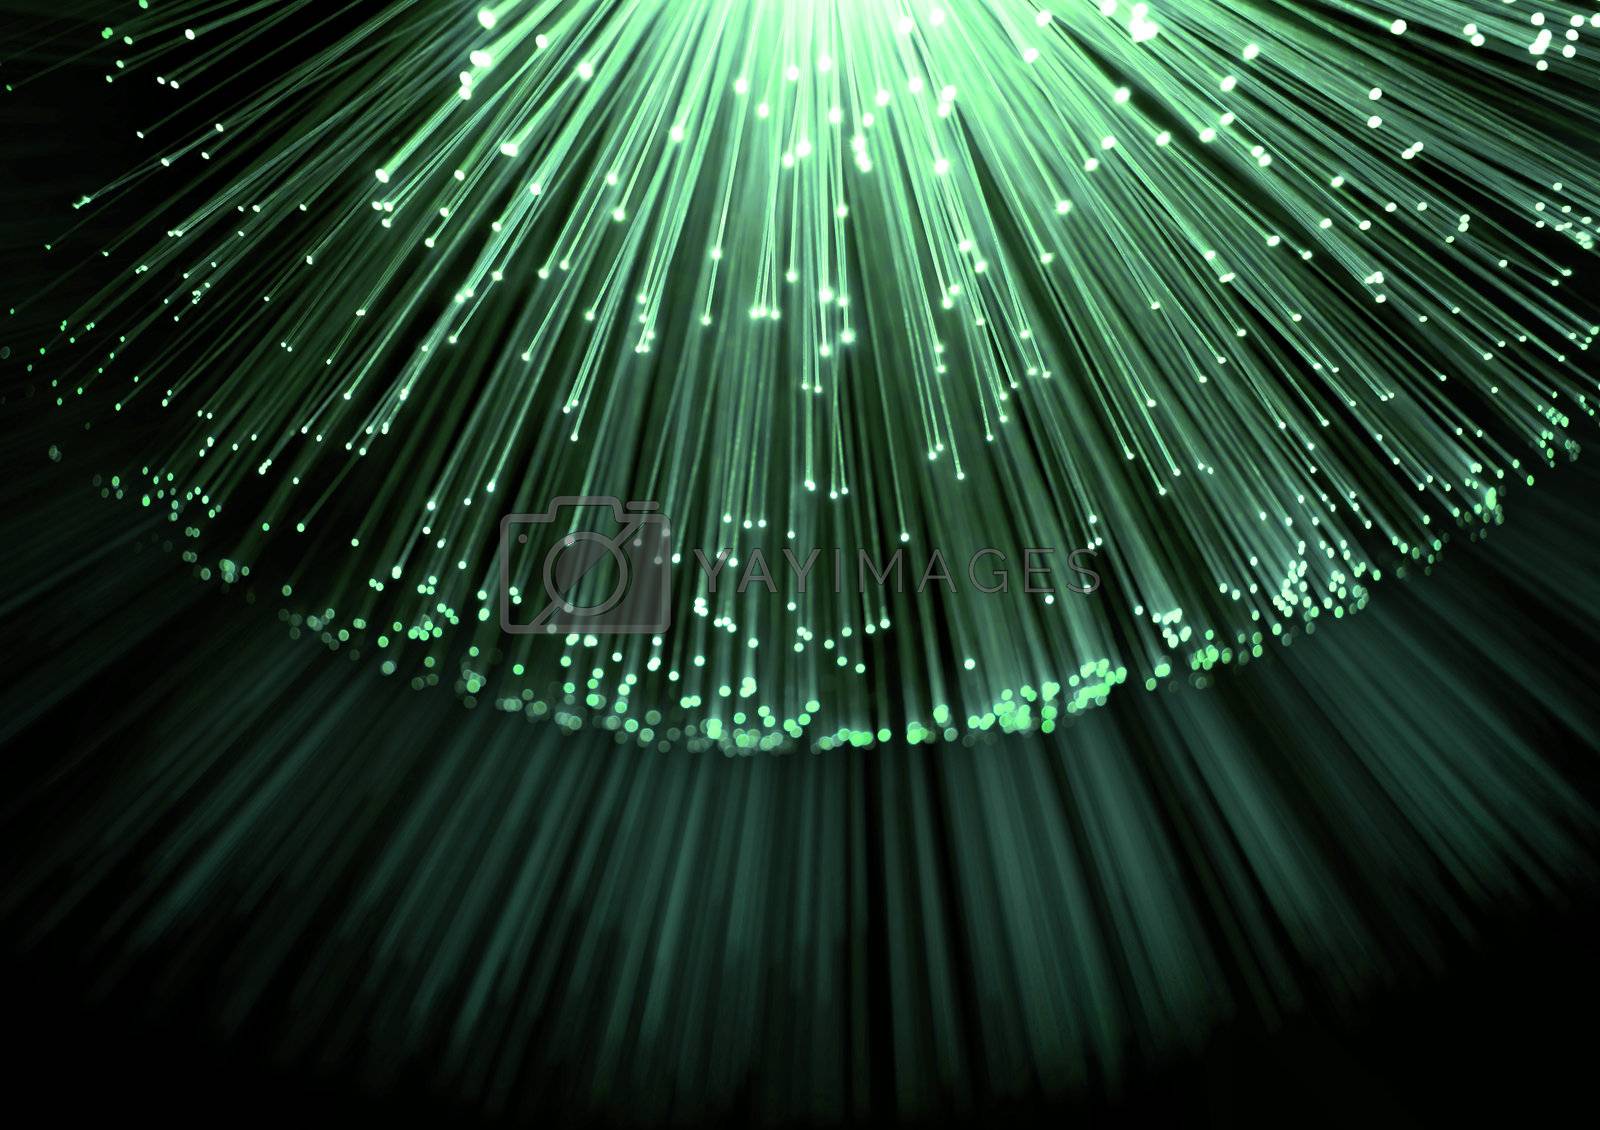 Royalty free image of Fiber optic background by 72soul